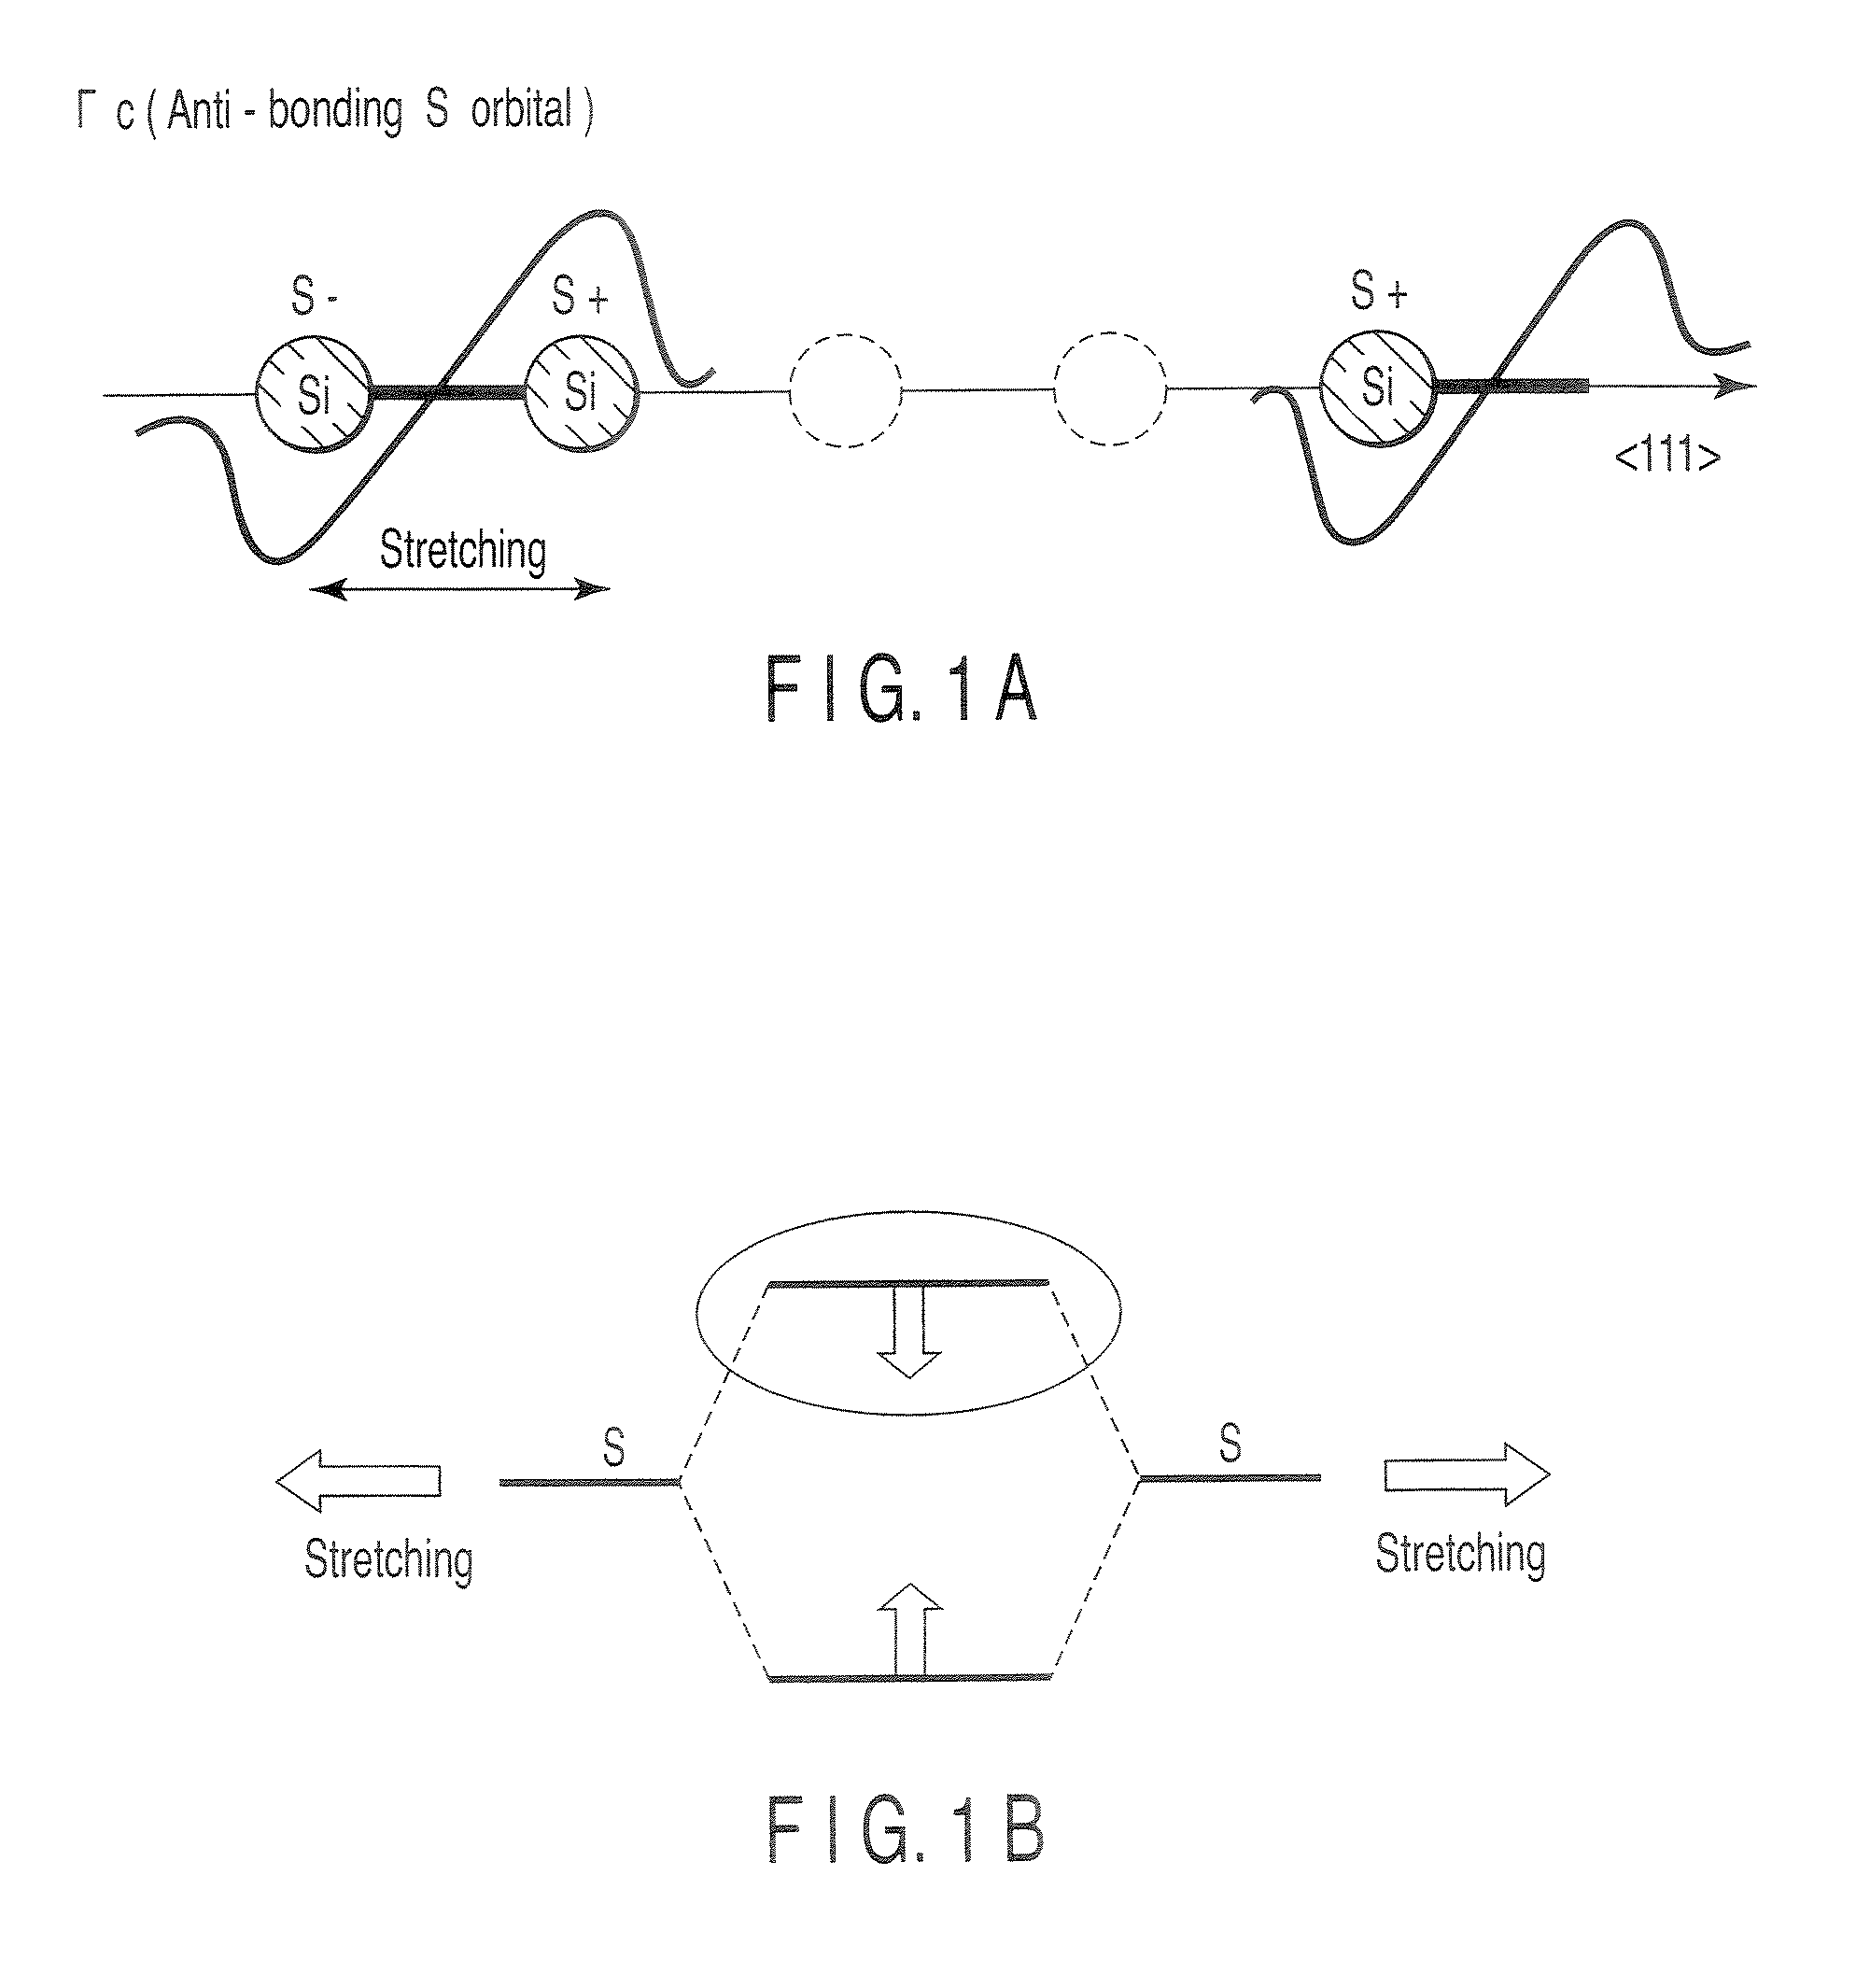 Semiconductor light-emitting material with tetrahedral structure formed therein